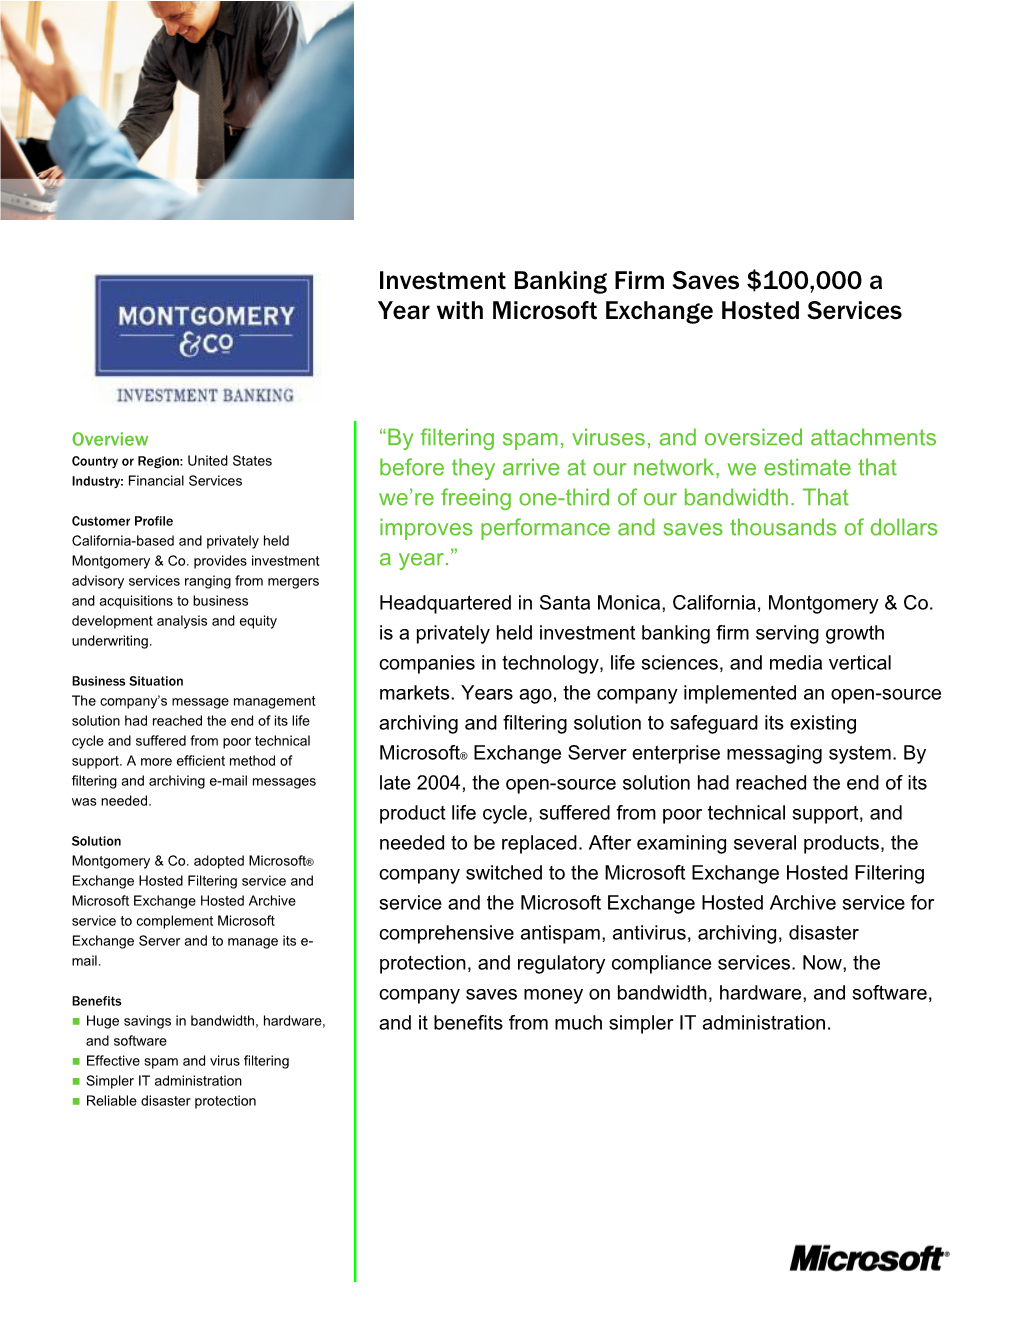 Investment Banking Firm Saves $100,000 a Year with Microsoft Exchange Hosted Services